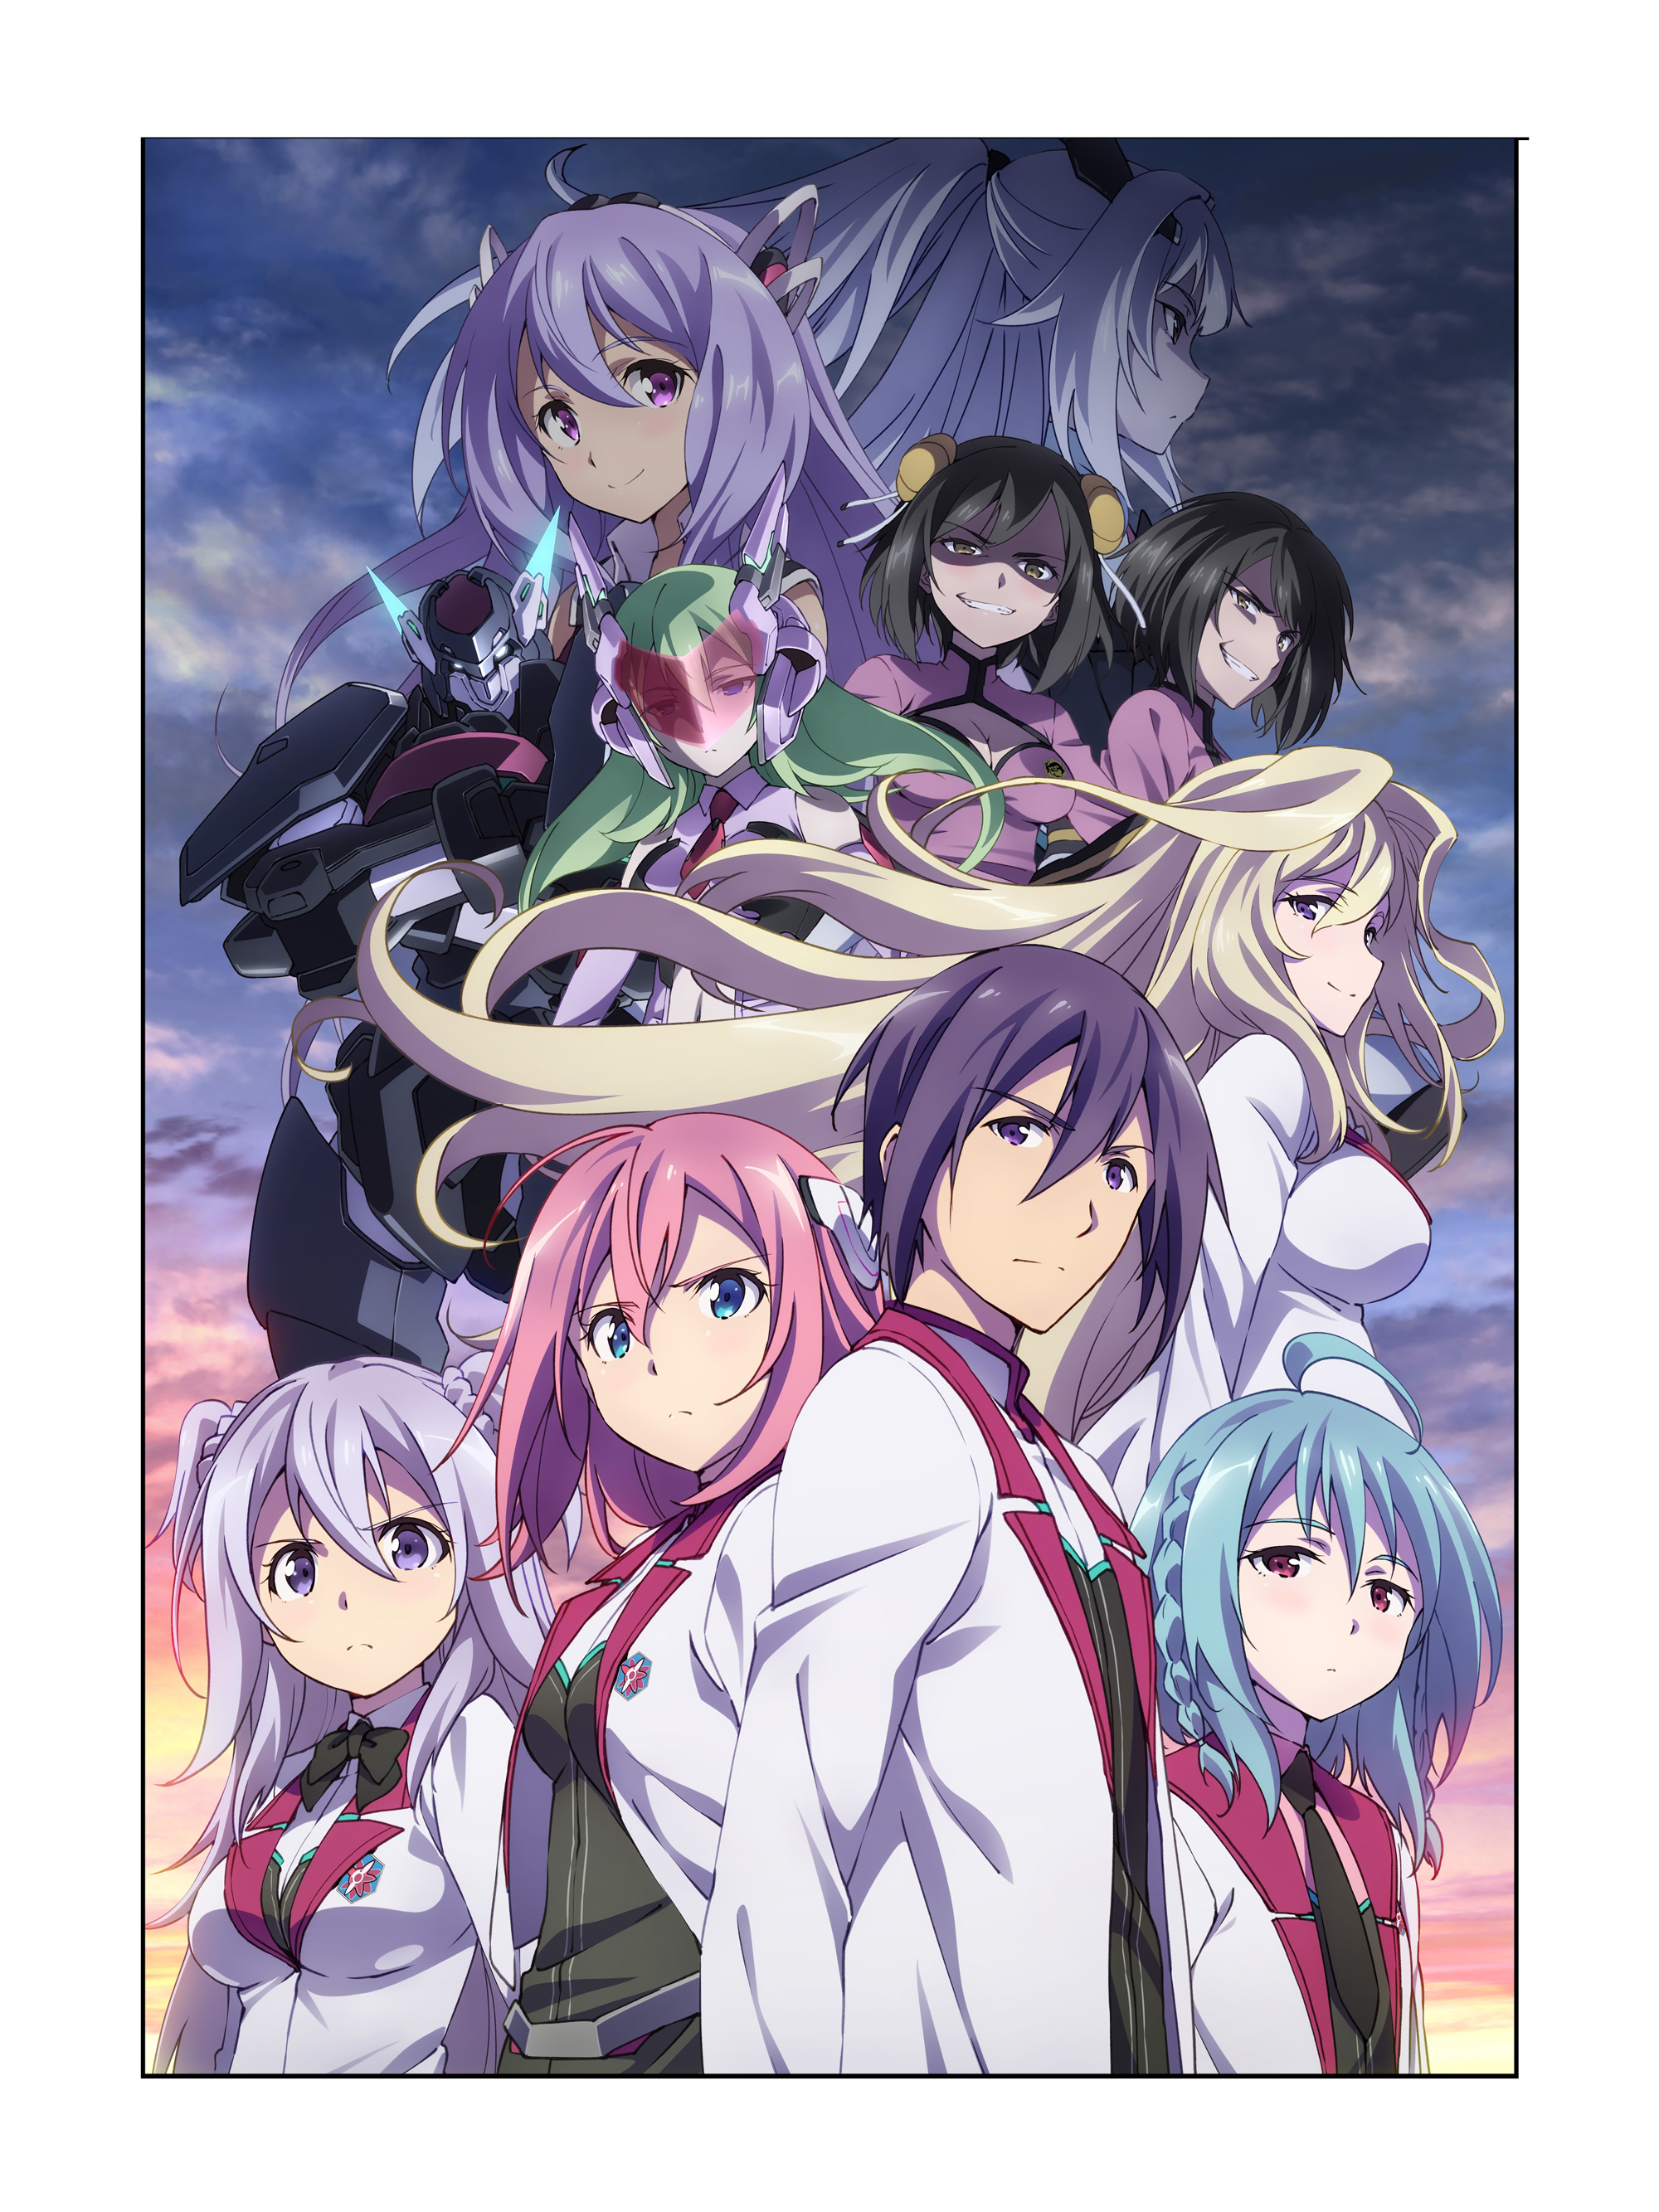 Gakusen Toshi Asterisk 2nd Season - Promotional Video - The song titled  The Asterisk War by Shiena Nishizawa. - The 2nd season is scheduled to  air on, By Gakusen Toshi Asterisk